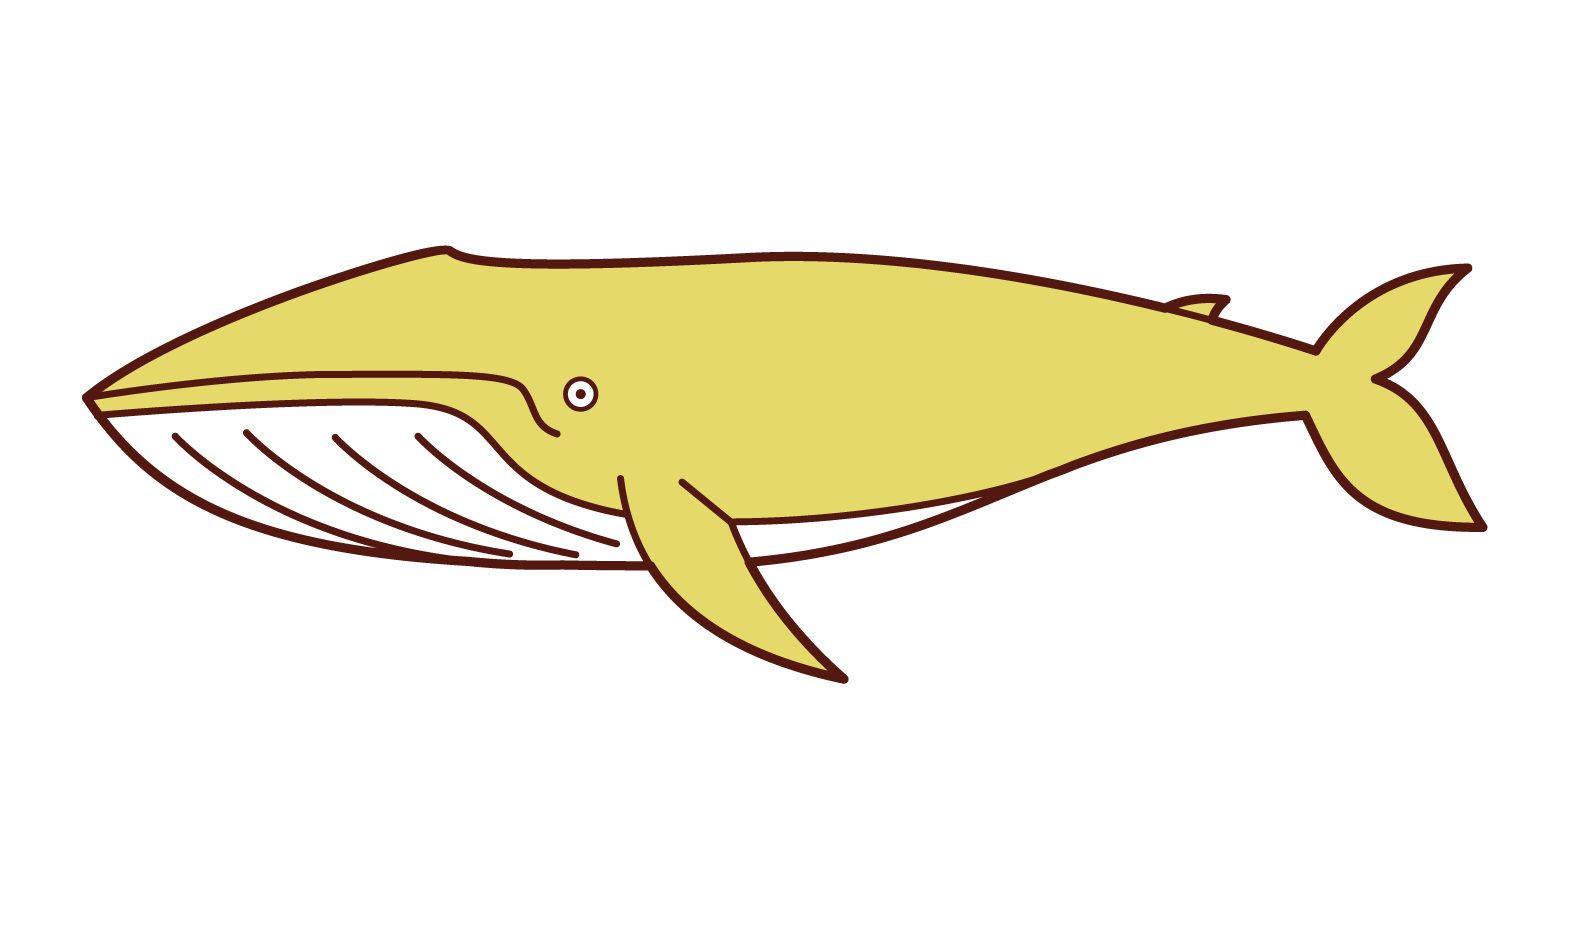 Illustration of a blue whale